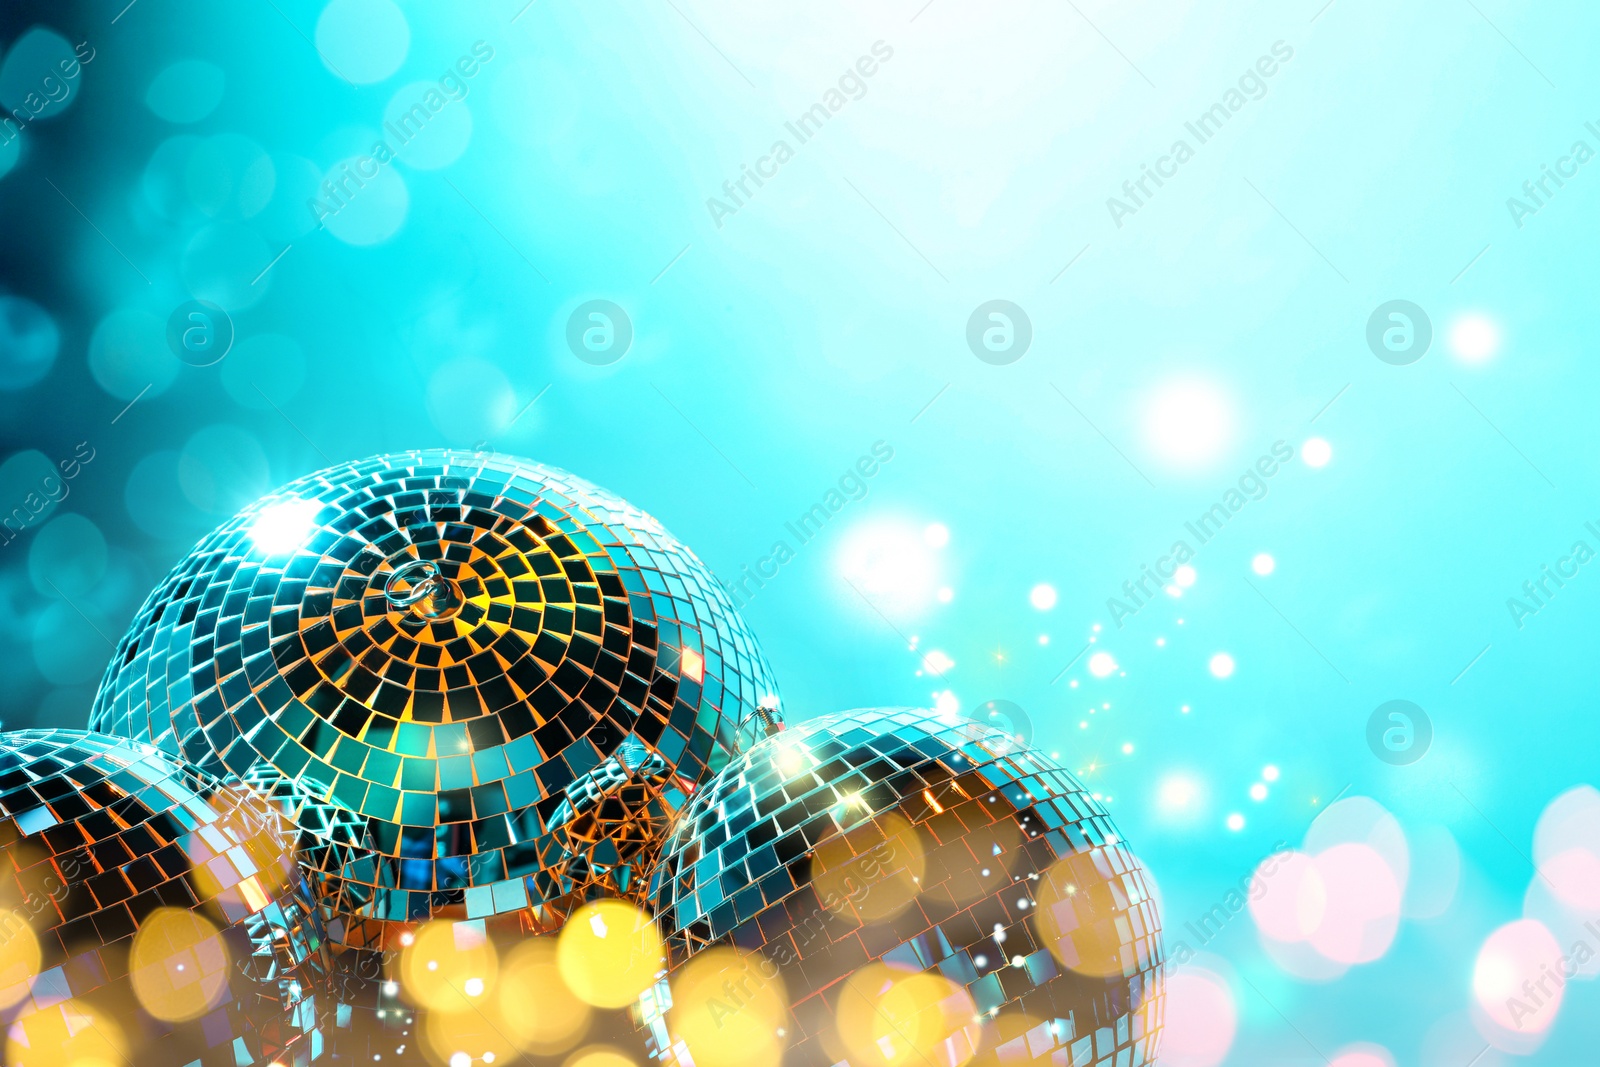 Image of Shiny disco balls on turquoise background with blurred lights, space for text. Bokeh effect